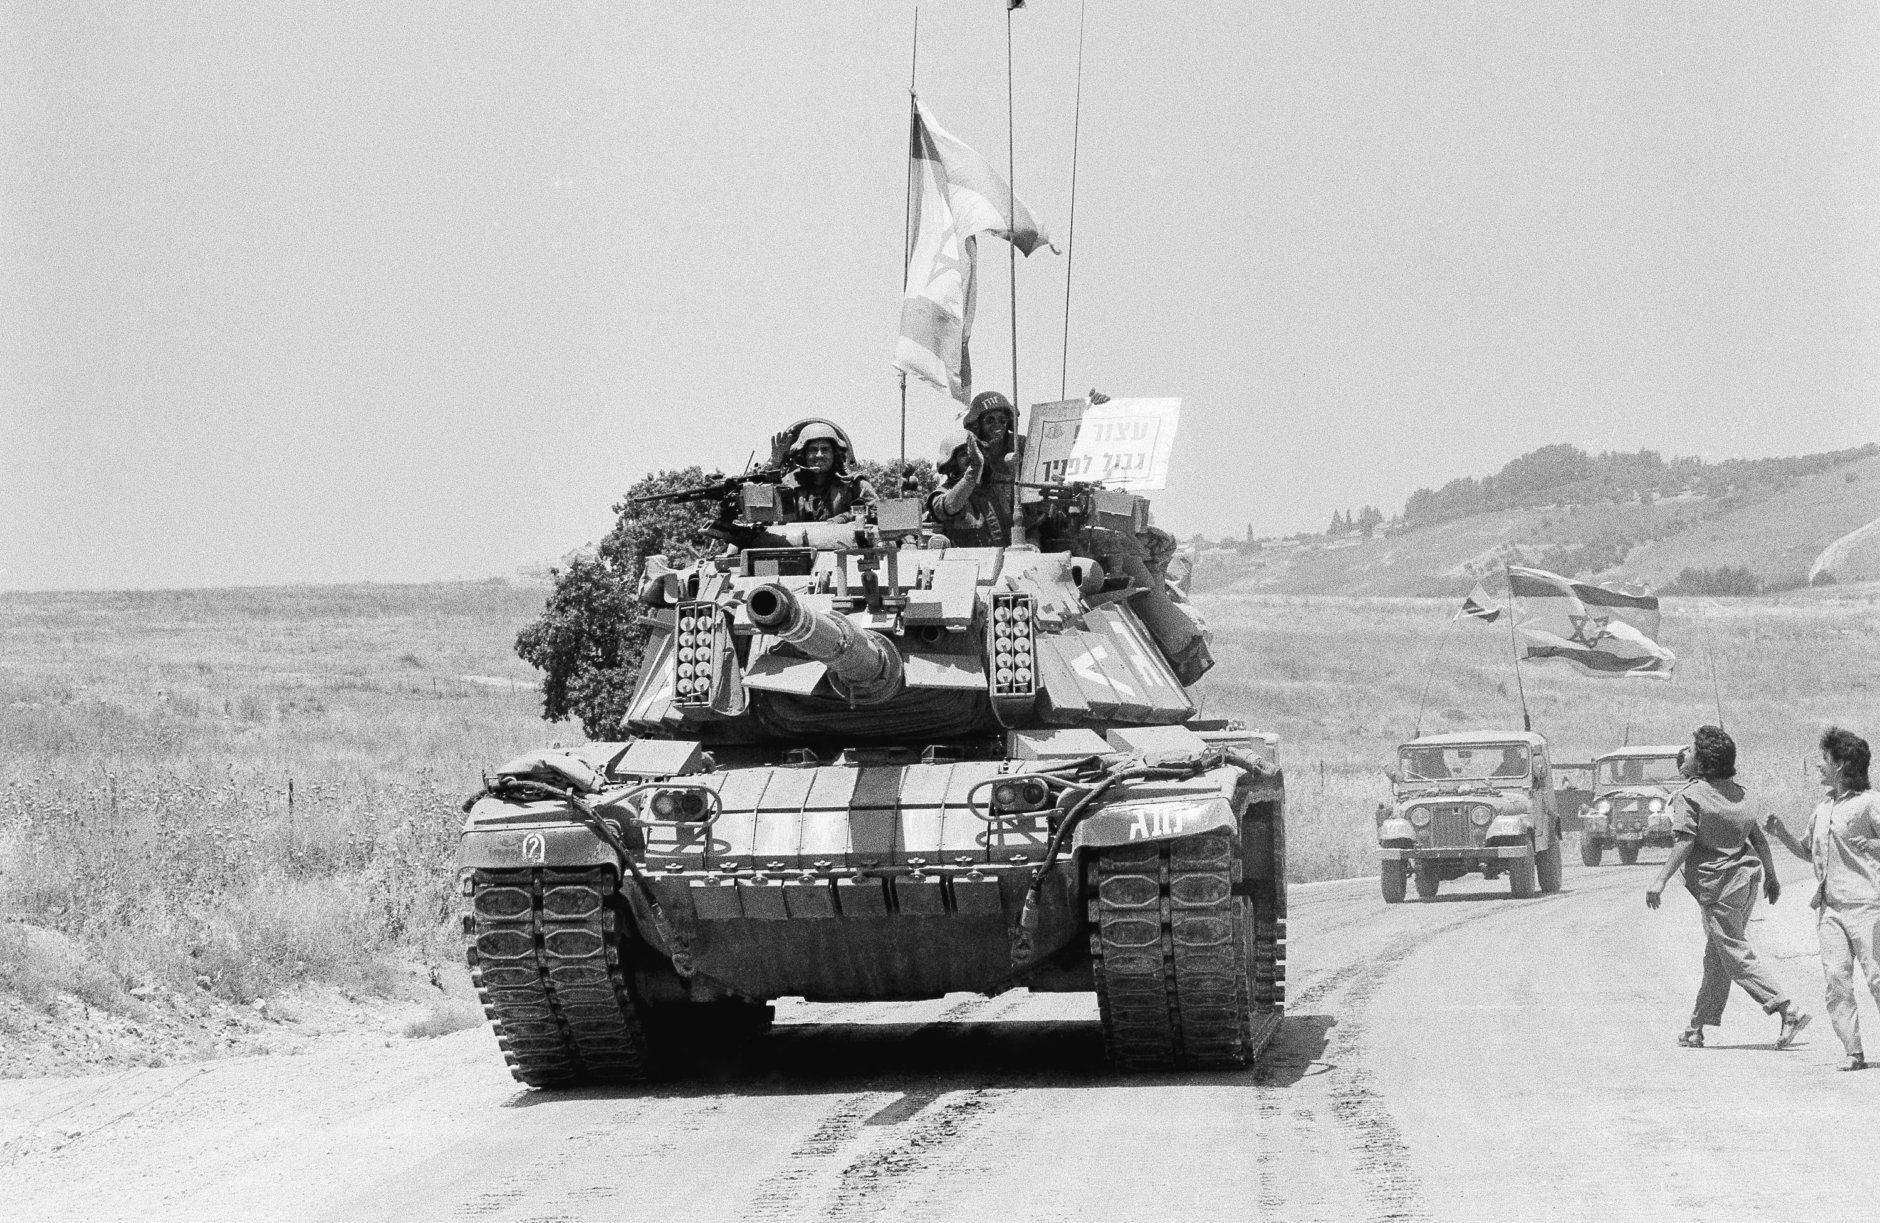 One of the last Israeli tanks to leave south Lebanon driving back into Israel on Monday, June 10, 1985 in Metulla, Israel. It was three years and four days since Israel invaded Lebanon during the Operation Peace for Oalilee. The smiling crewmen on the turret of the American-made Patton tank are holding a sigh; saying in Hebrew Stop', Border is in front of you. (AP Photo/Max Nash)